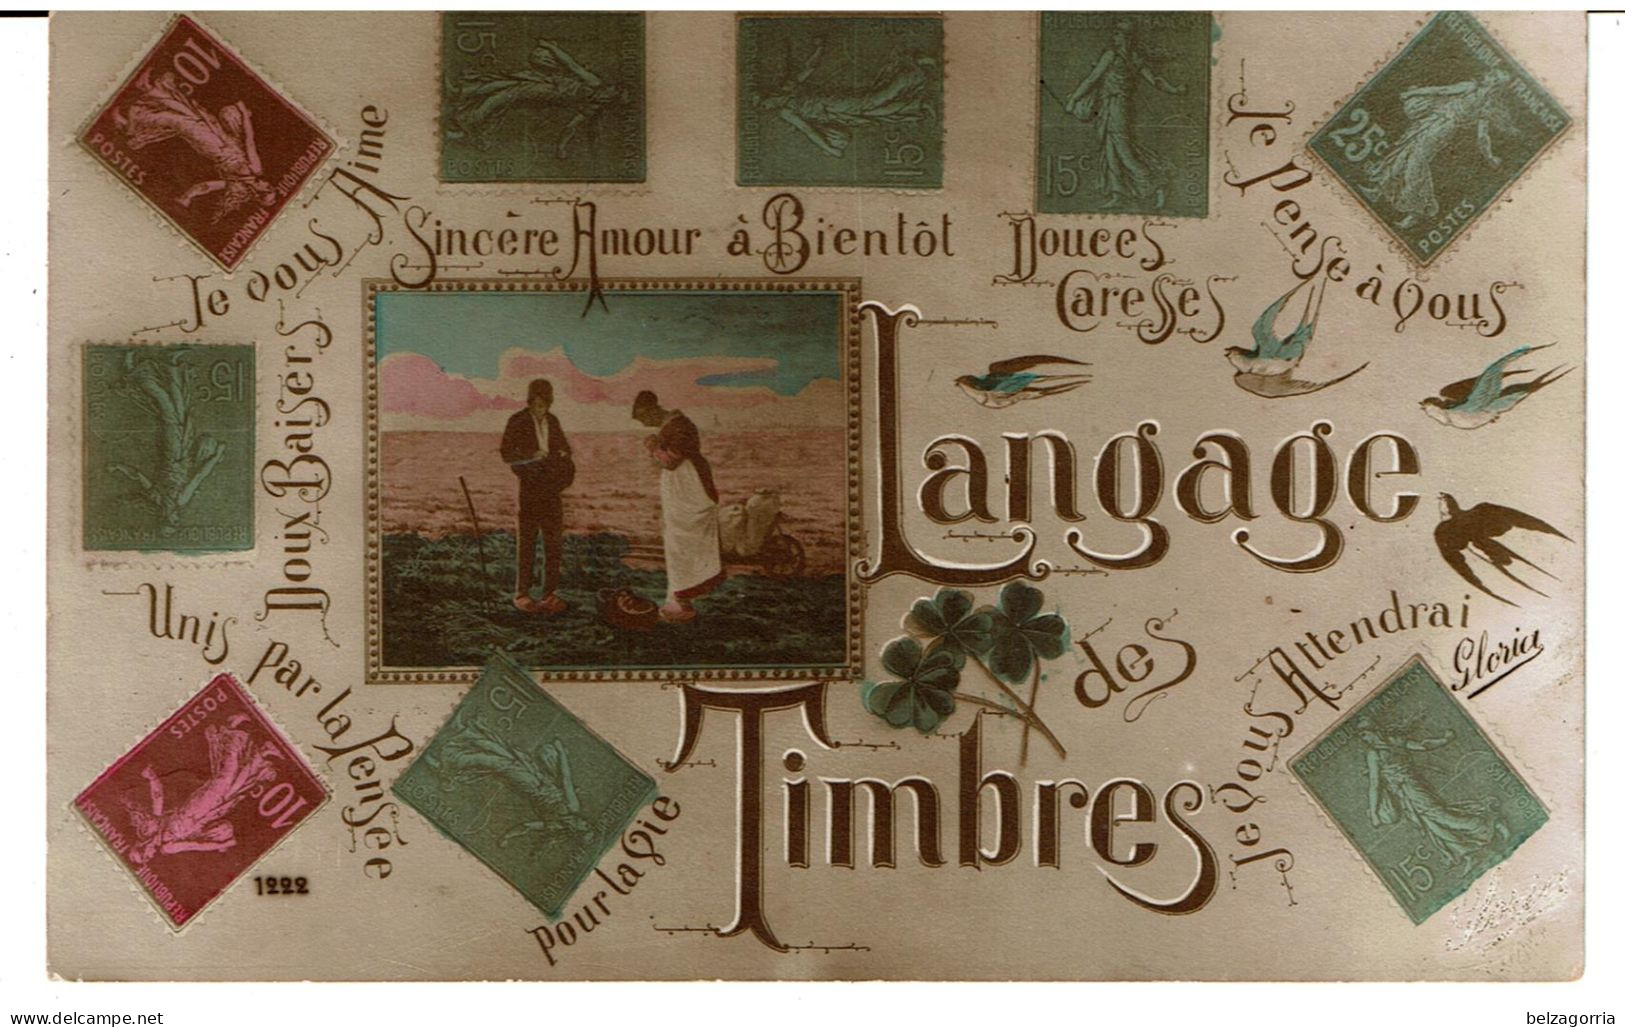 LANGAGE DES TIMBRES  -  SEMEUSES - FANTAISIE - 1222 - Stamps (pictures)